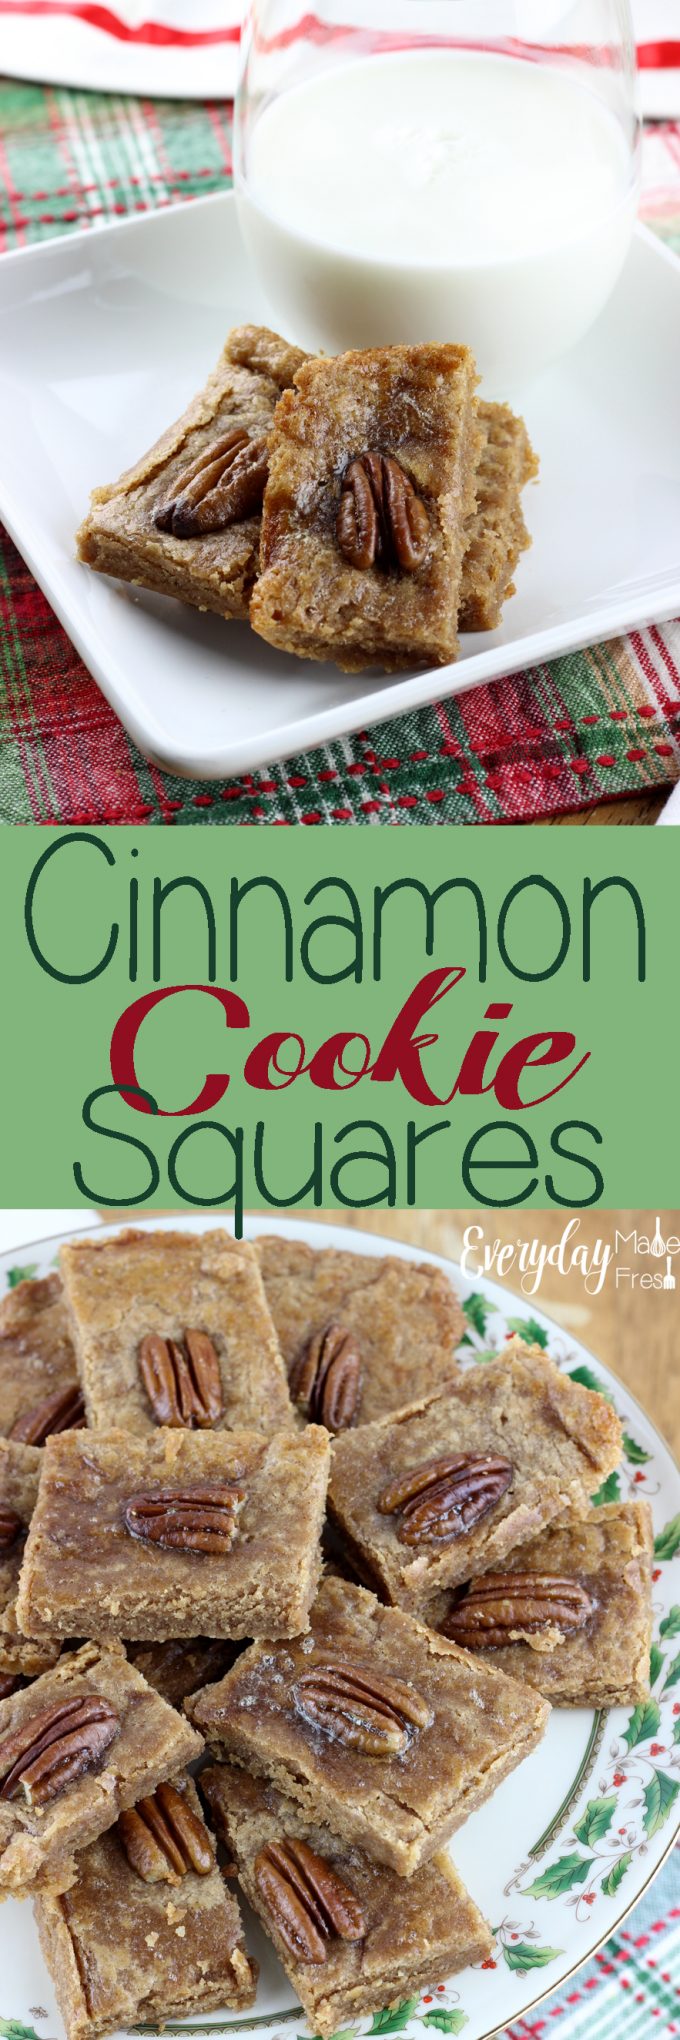 These Cinnamon Cookie Squares are as simple as they get! You are only 6 ingredients and 15 minutes away from one of these perfect squares. | EverydayMadeFresh.com